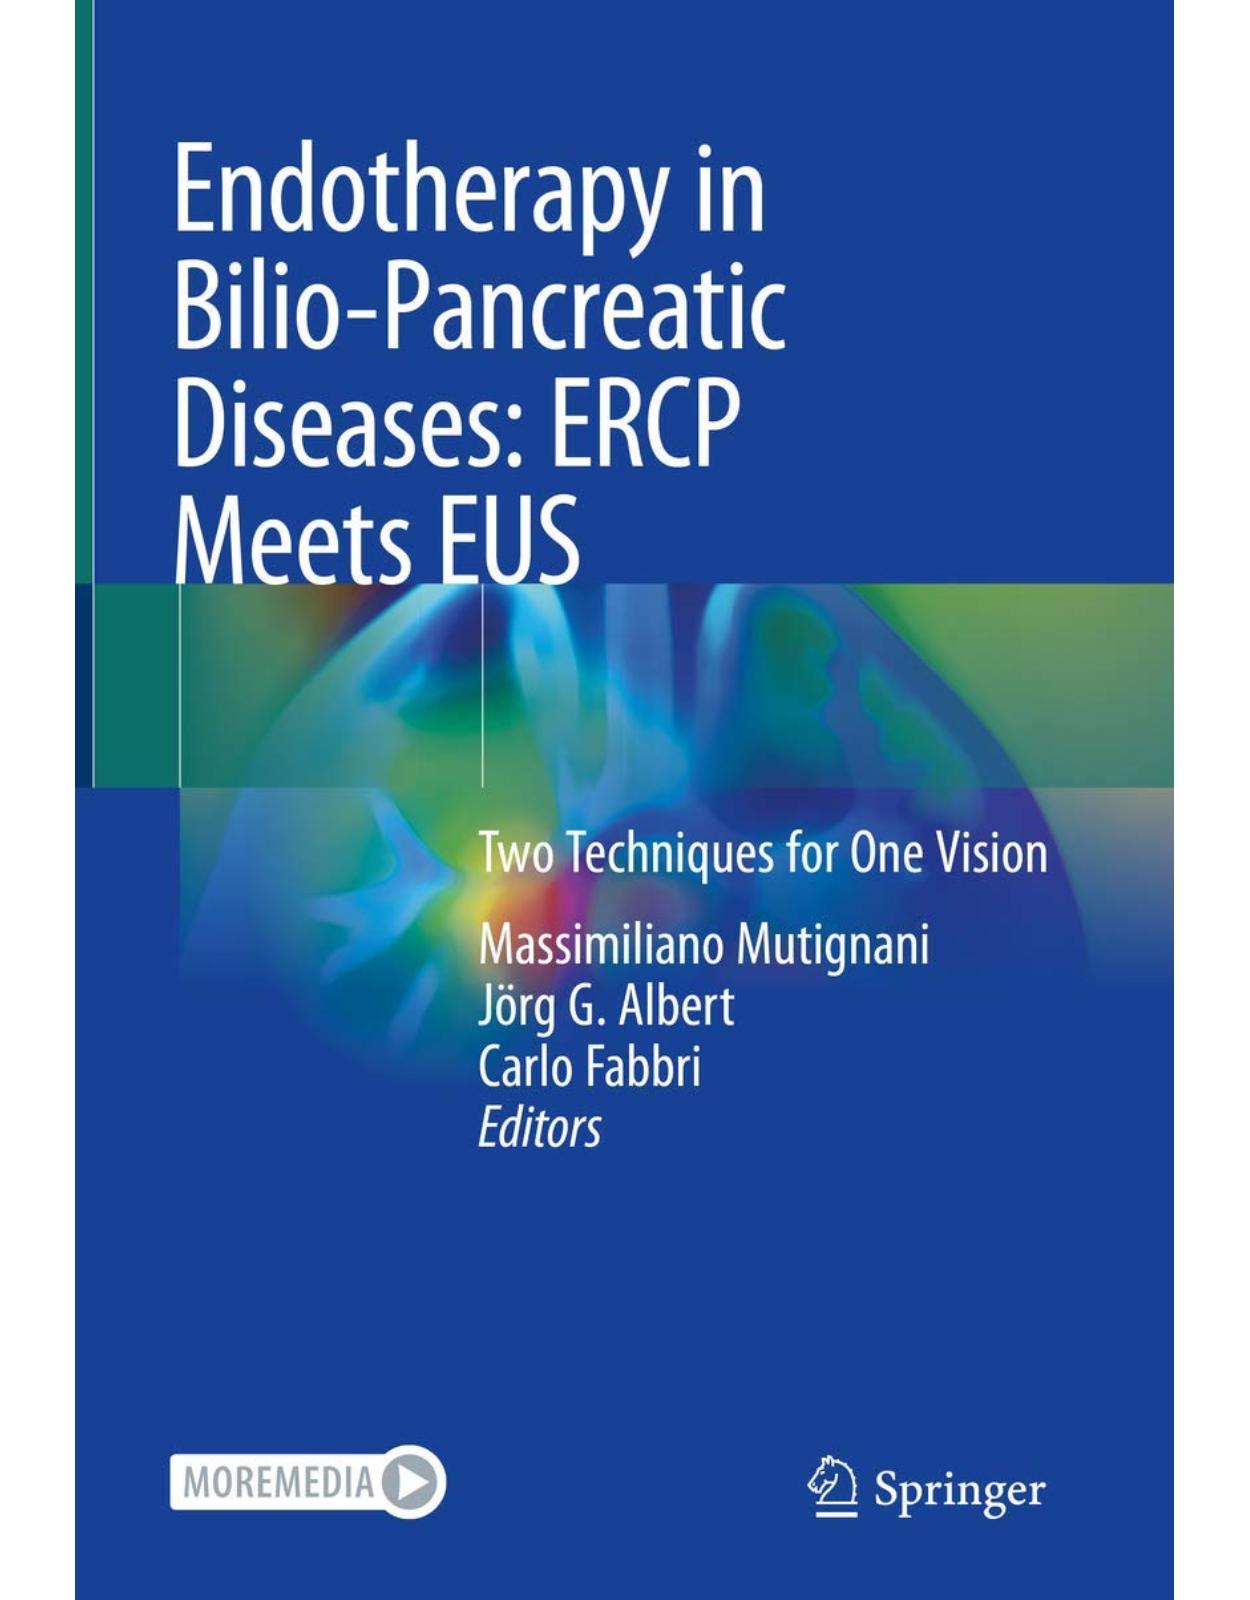 Endotherapy in Biliopancreatic Diseases: ERCP Meets EUS: Two Techniques for One Vision